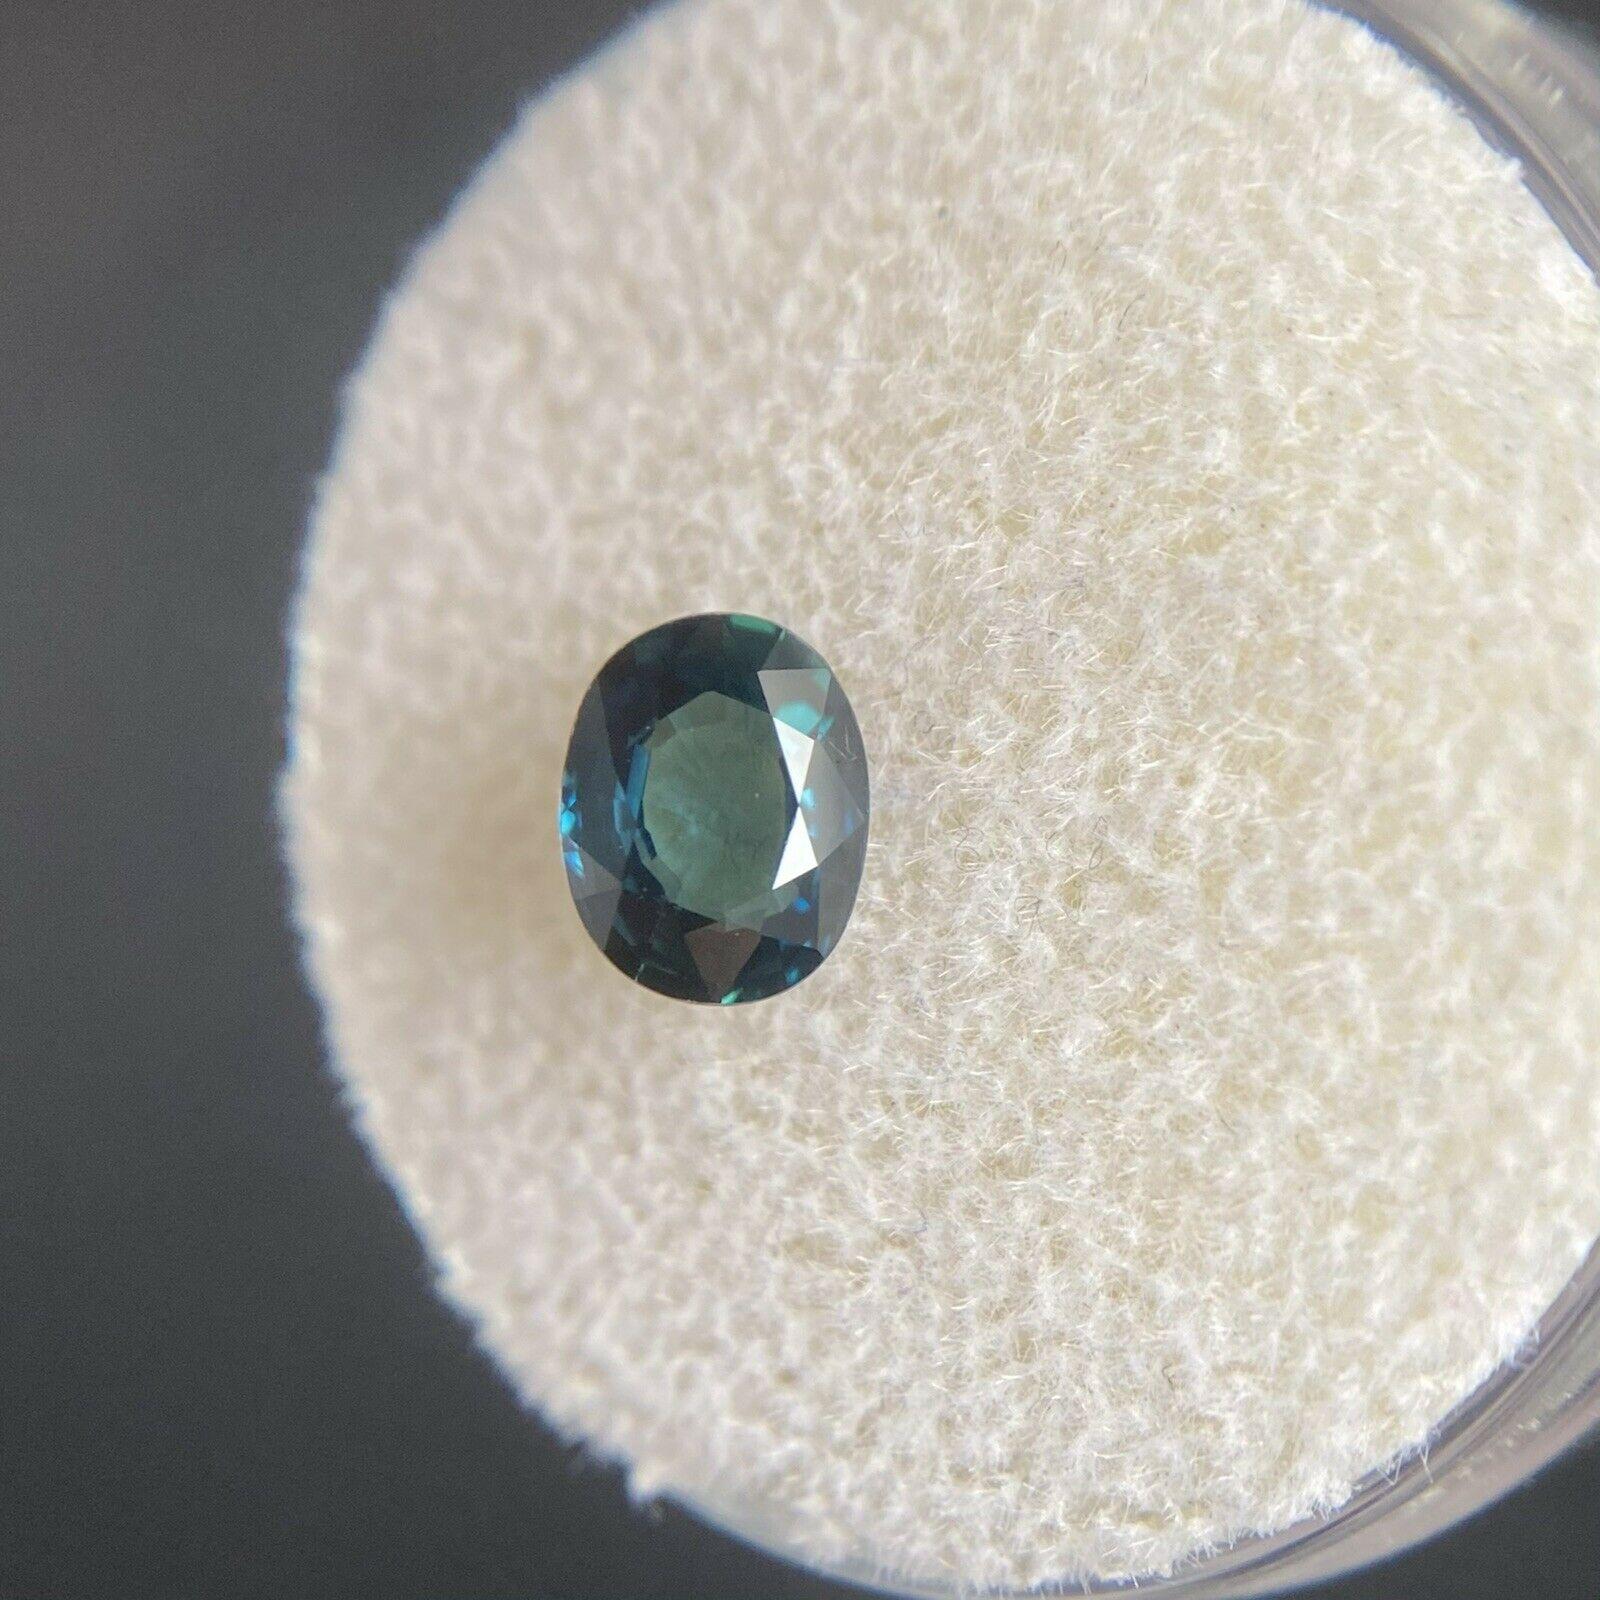 Unique Bi Colour 1.00ct Deep Green Blue Teal Sapphire Oval Cut Loose Gem 6.5x5mm

Greenish Blue Bi Colour Natural Sapphire. 
1.00 carat stone with a beautiful and unique greenish blue colour. Also has a very good oval cut and ideal polish to show